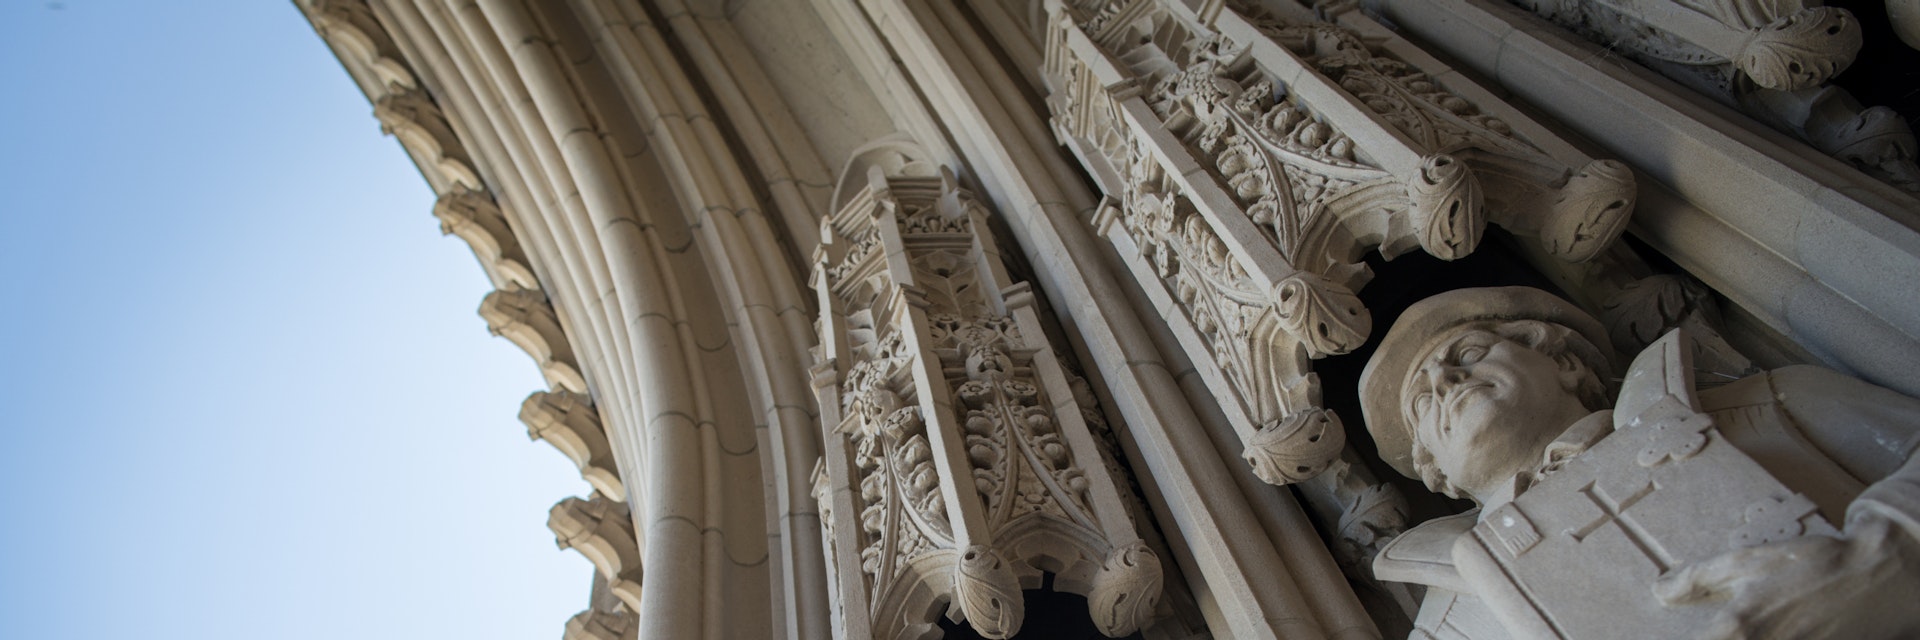 Gothic sculptures at the entrance of the main chapel at Duke University in Durham, North Carolina.